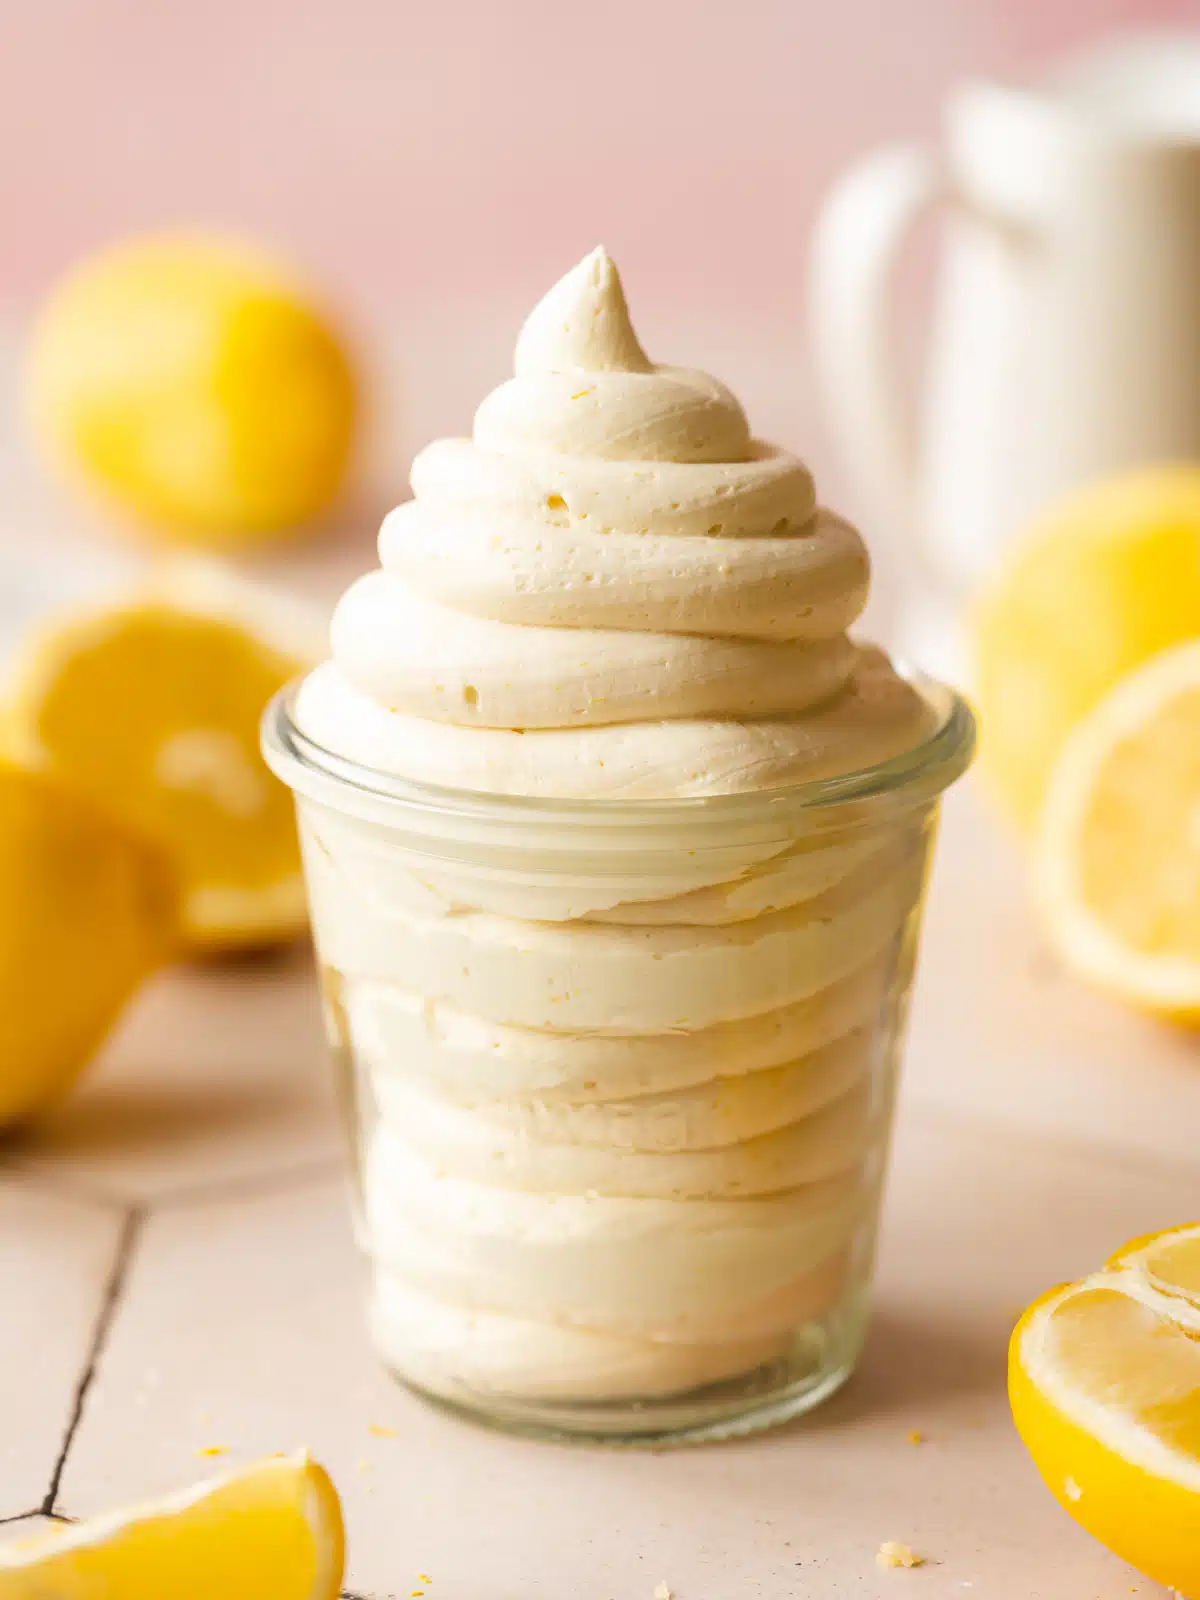 dairy free lemon frosting piped into a glass jar with sliced lemons in the background.